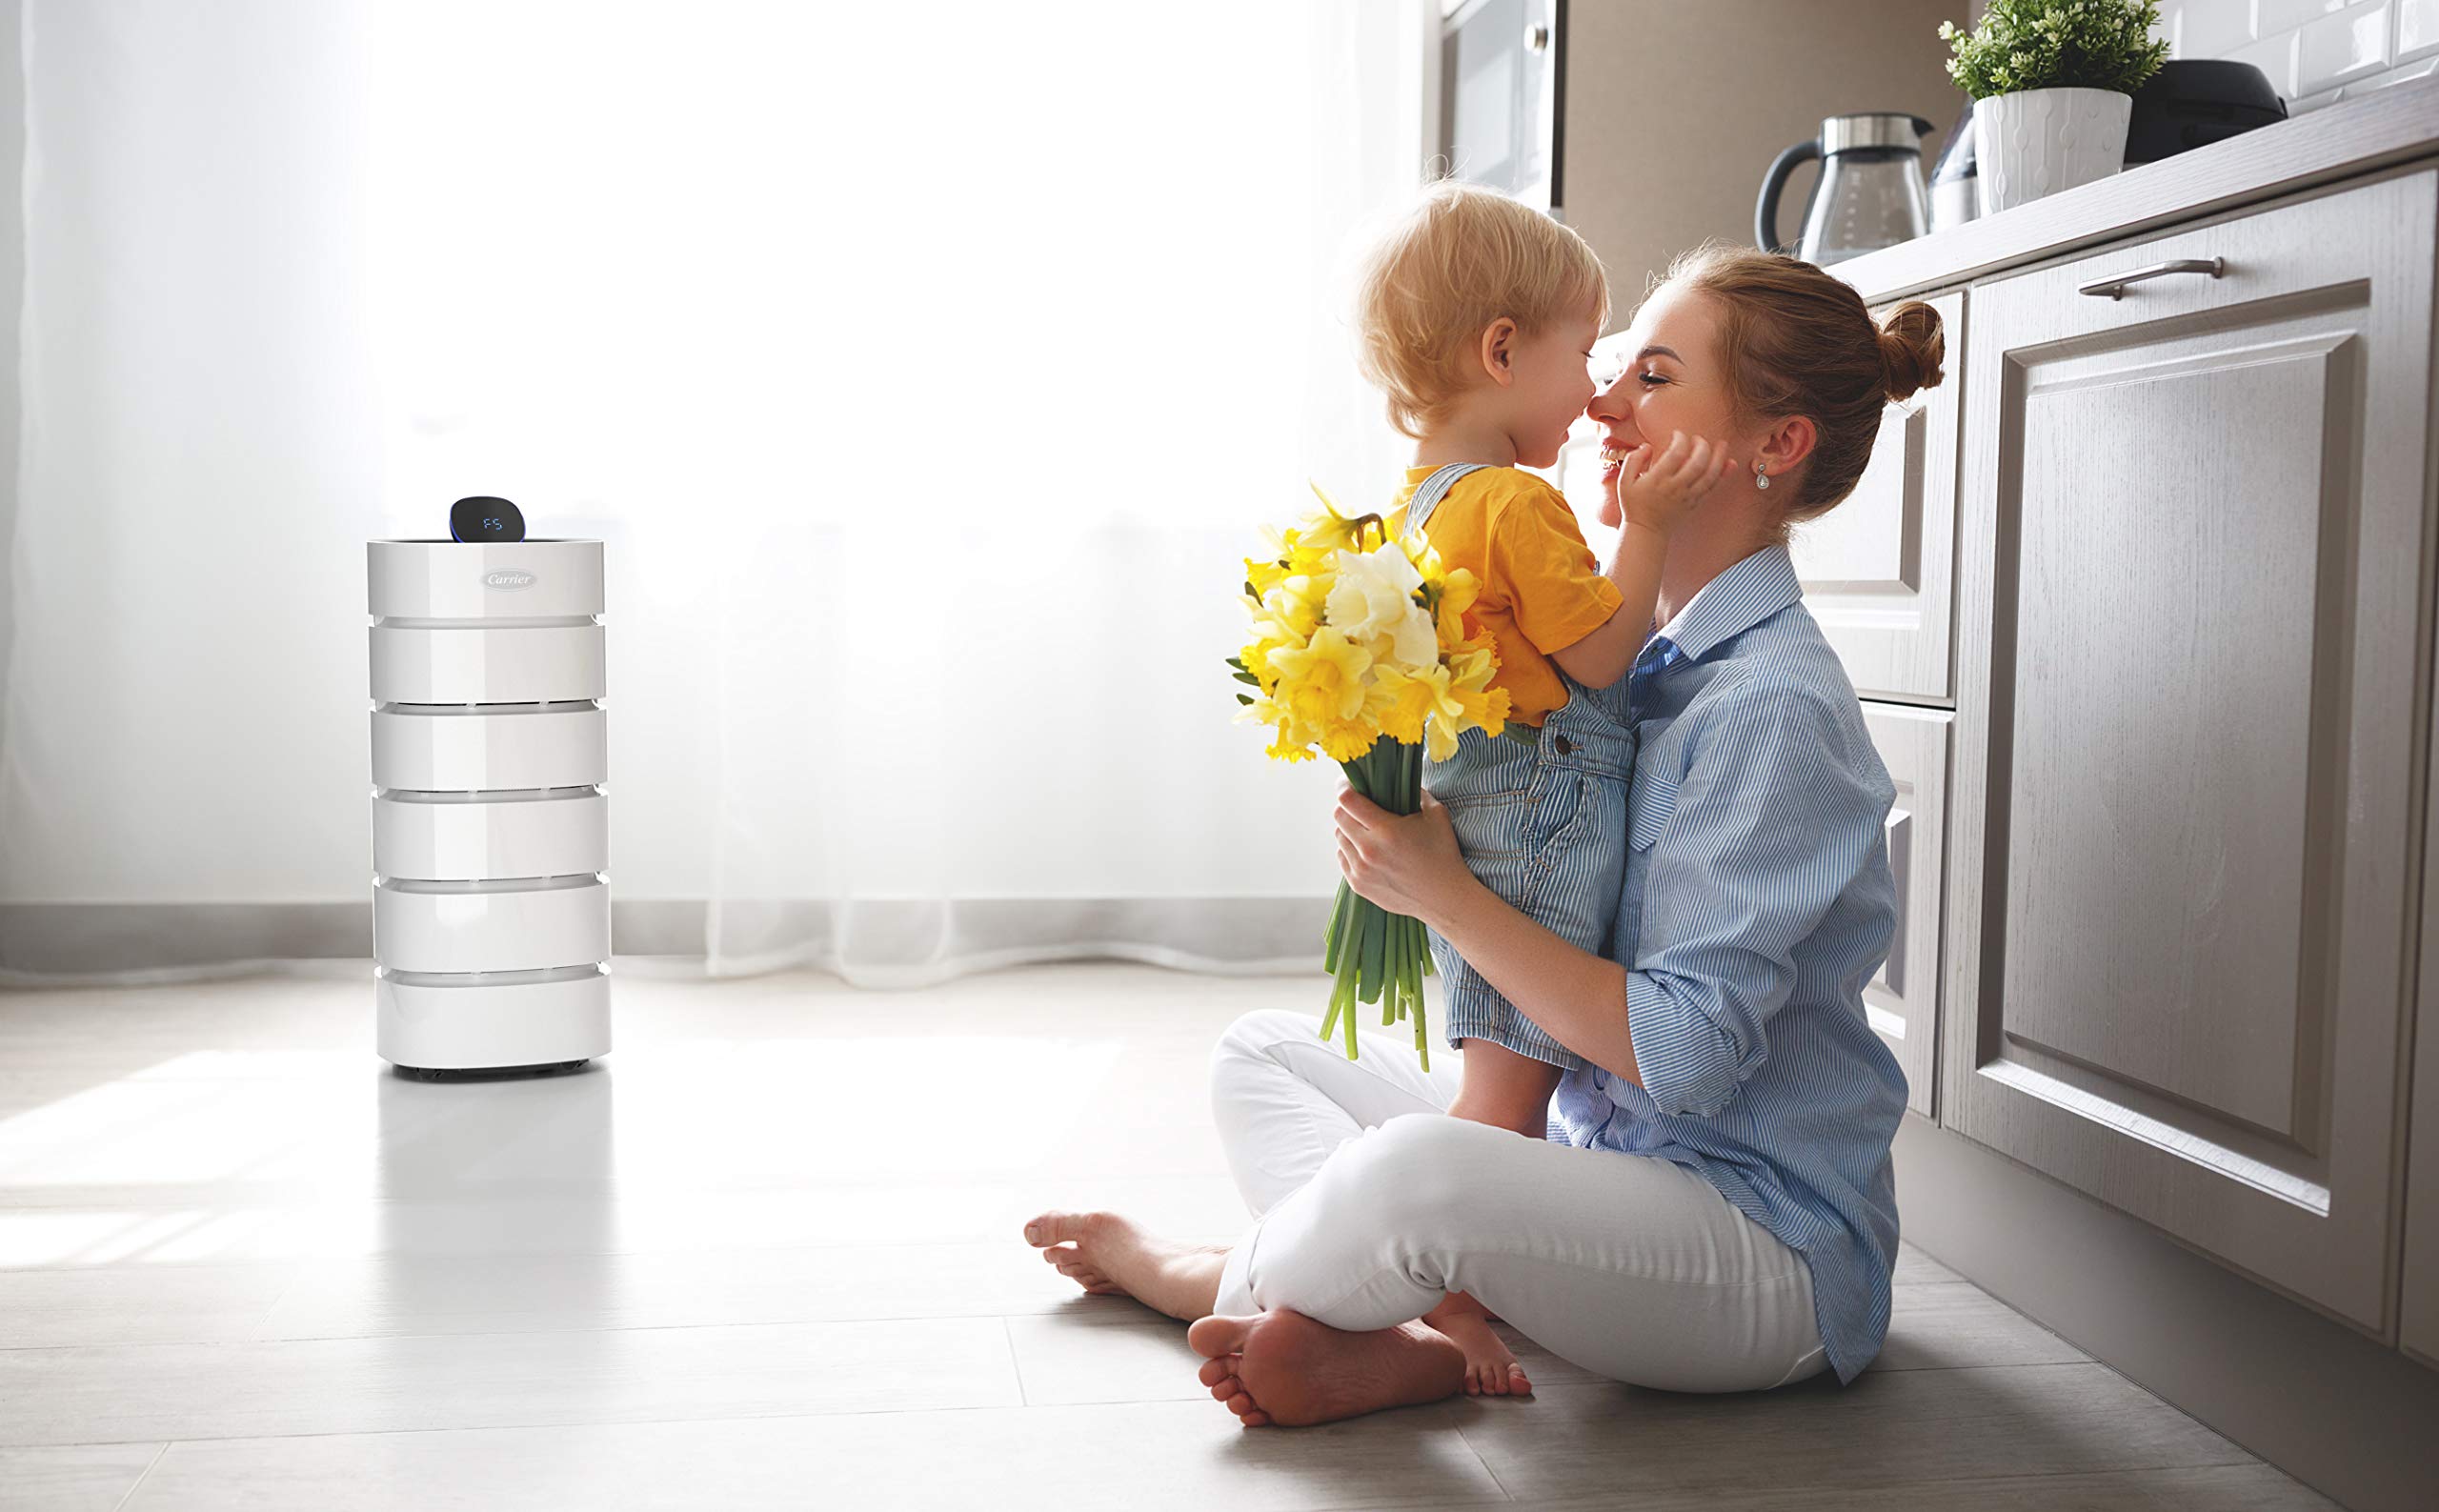 Carrier Smart Air Purifier Includes HEPA Filter and Air Quality Sensor, AHAM Verified for Rooms up to 560 Sq. Ft. with 360 Degree Filtration, White, 31.5 Inches (RMAP-SXL)